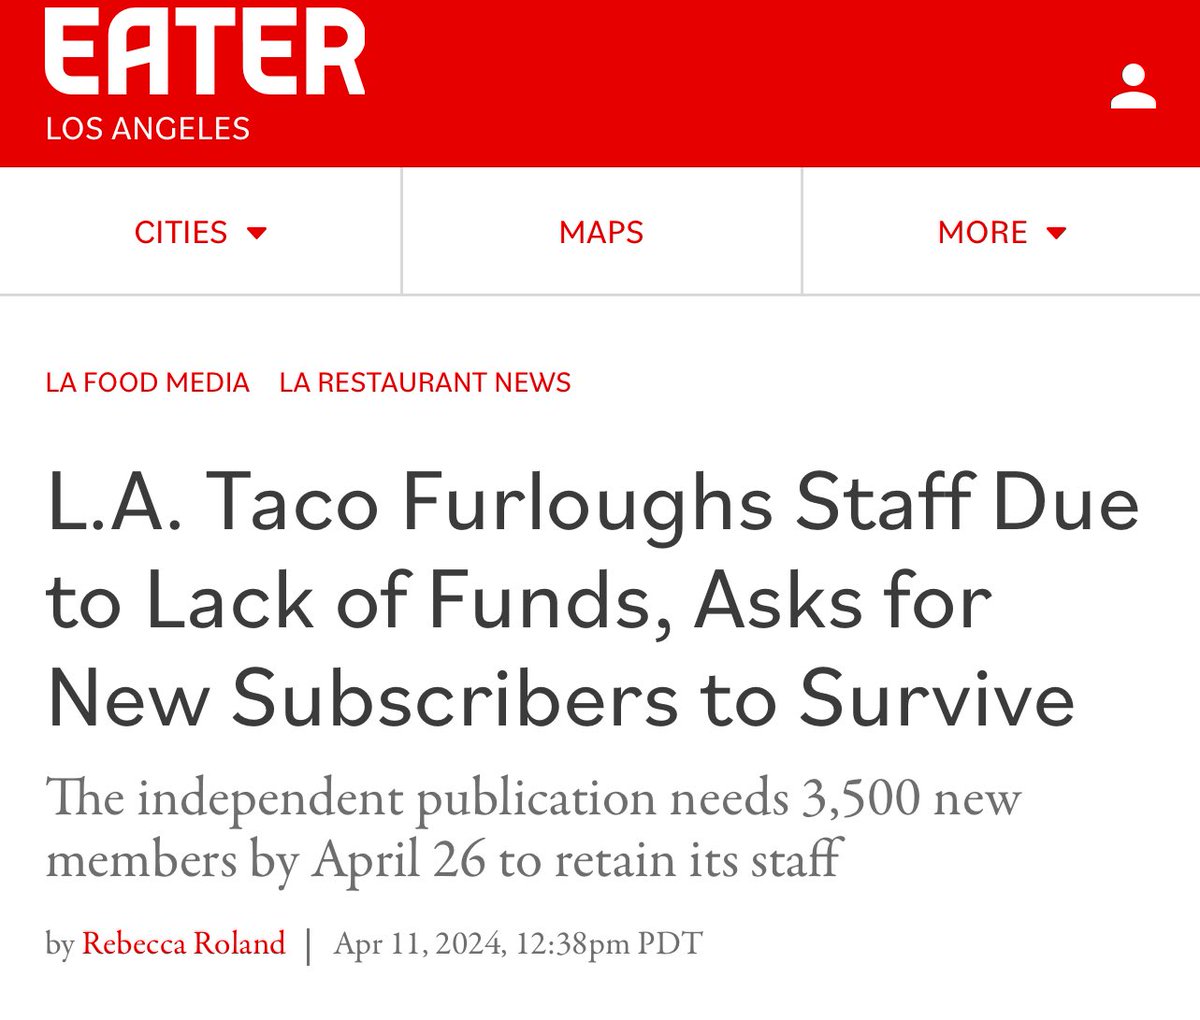 HUGE UPDATE!! The public support for @LATACO over the past 24 hours has been amazing! If we keep pushing out this message, we can SAVE THE NEWSROOM!! Become a member here: lataco.com/join